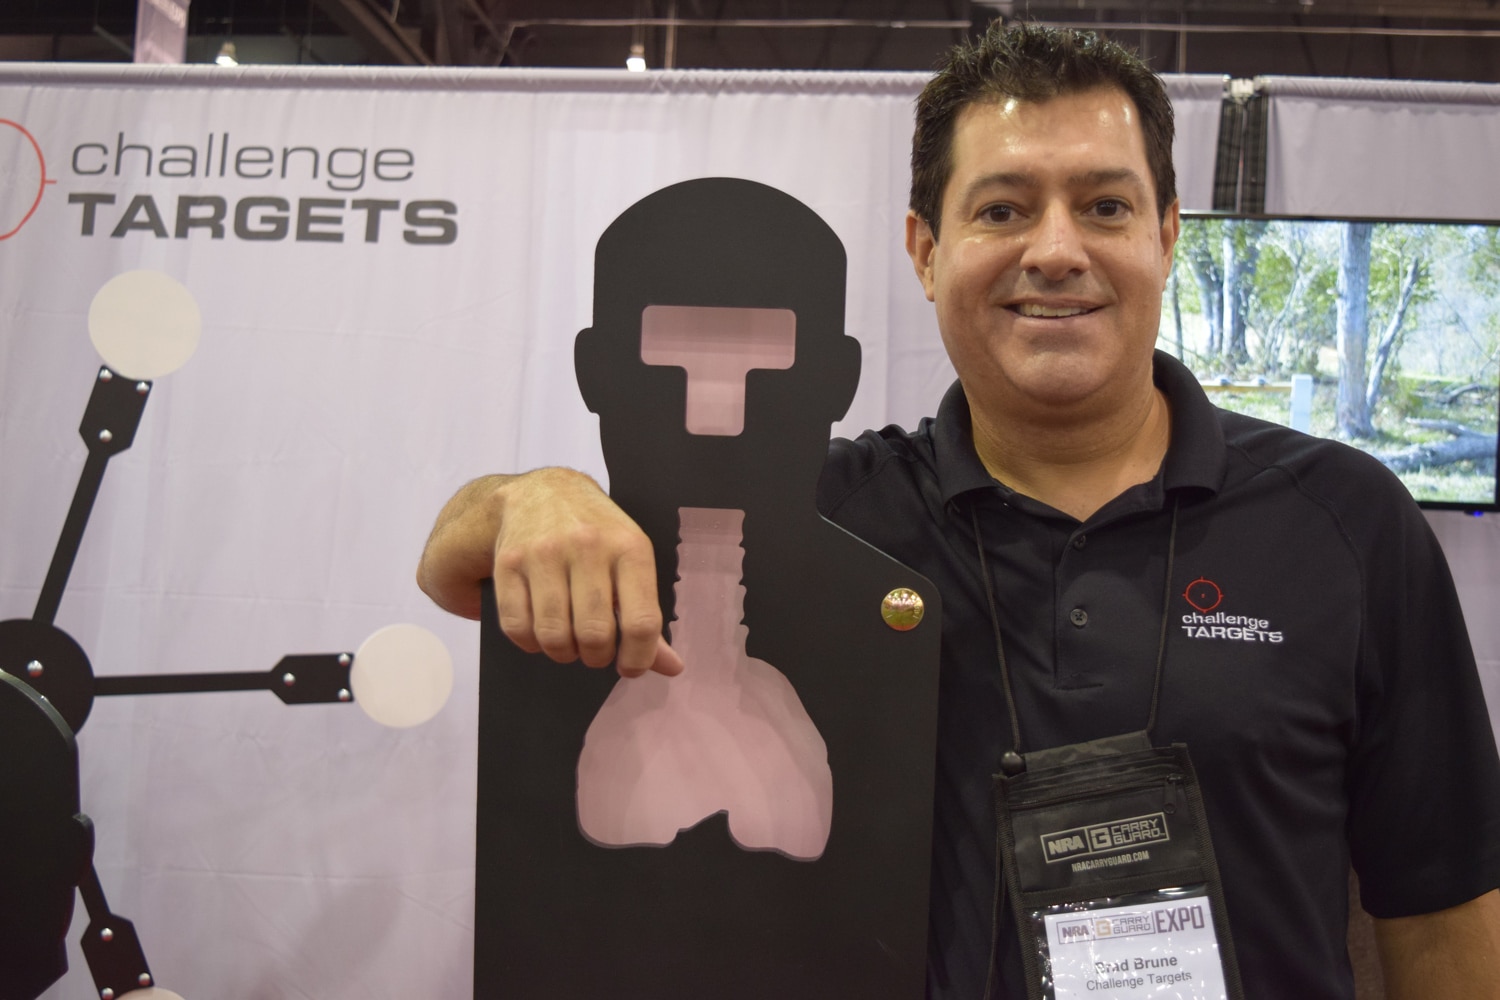 Brad Bruce, president of Challenge Targets, shows of his new iteration of reactive targets the "double entendre" (not the real name). (Photo: Daniel Terrill/Guns.com)